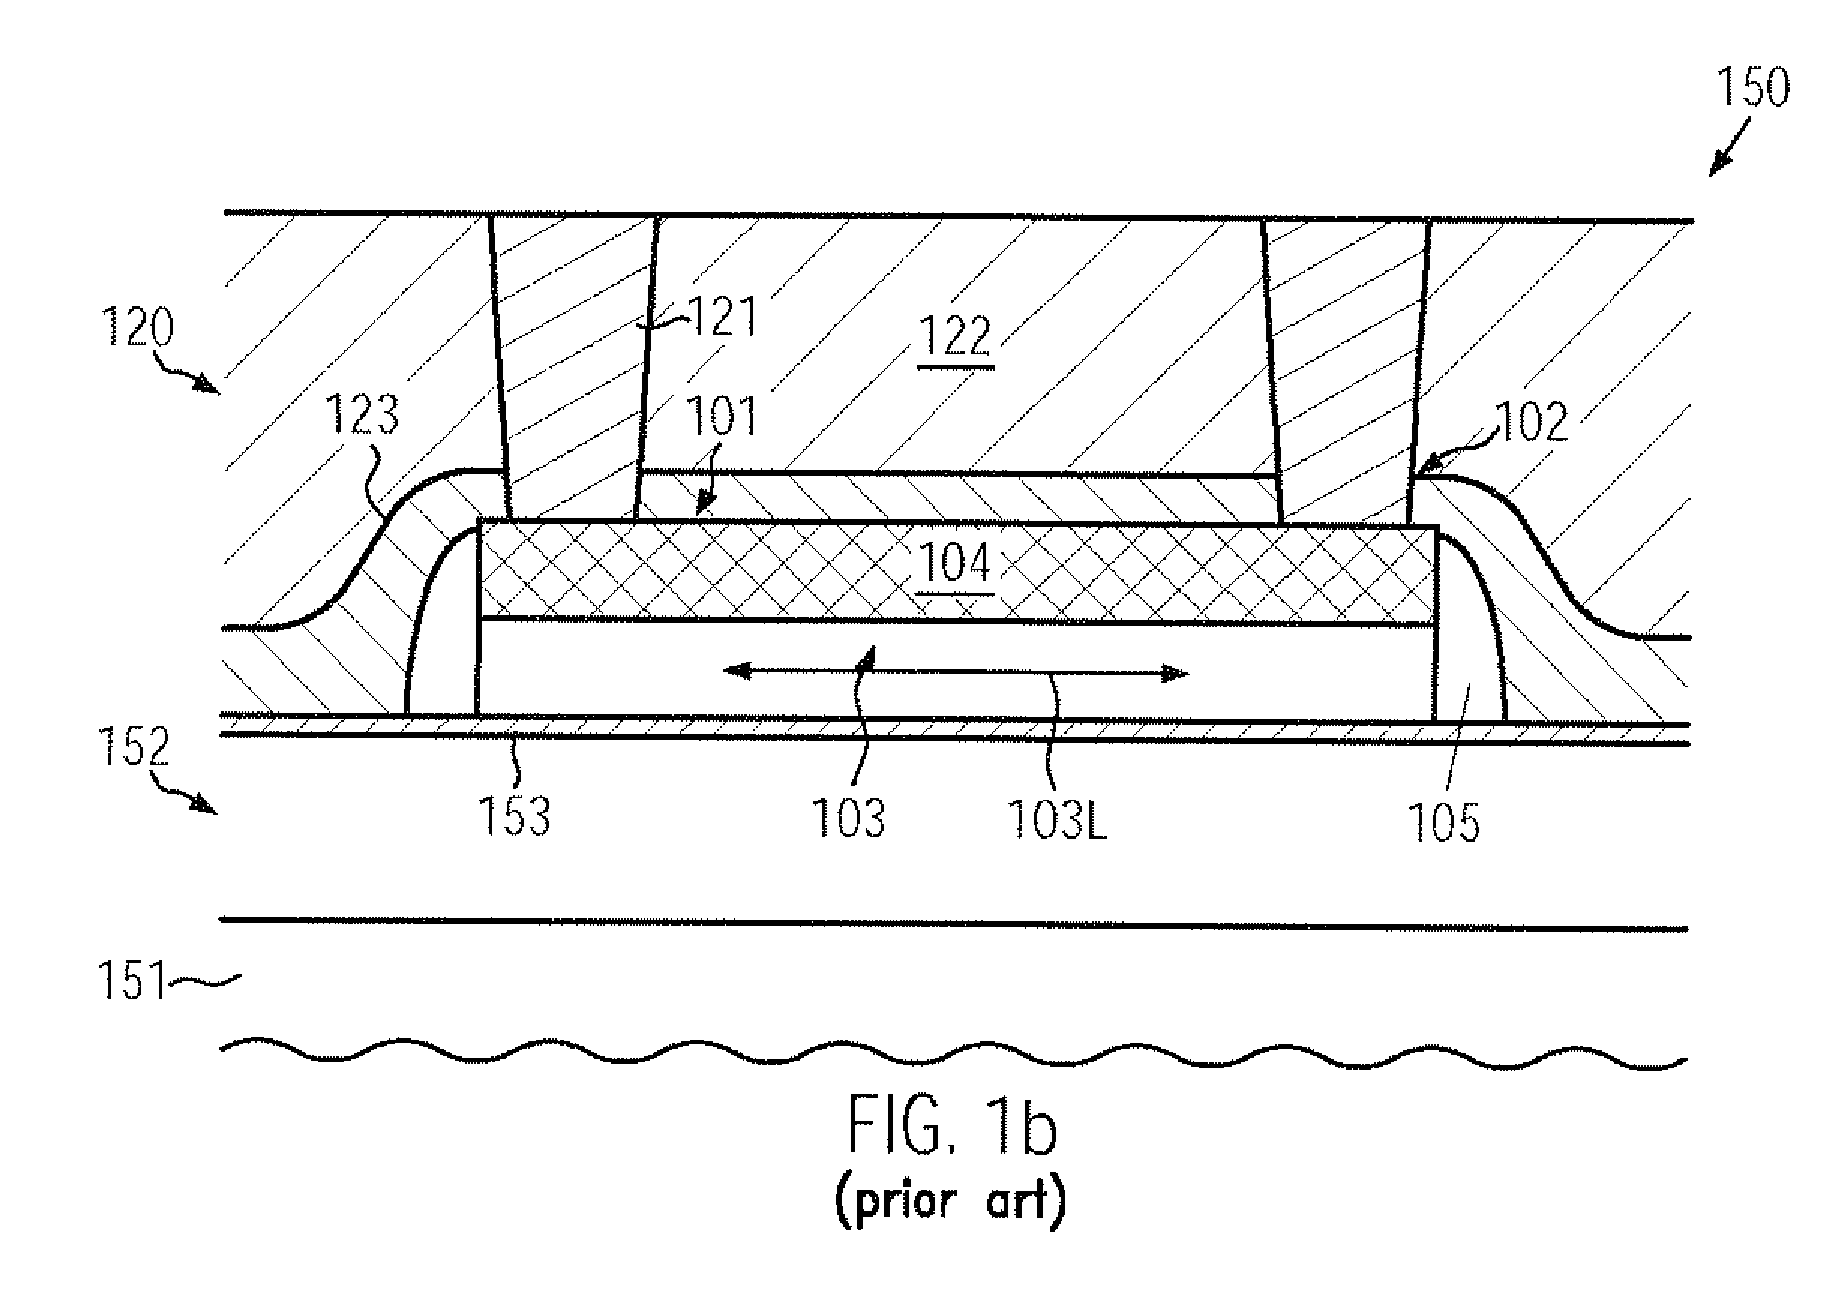 SEMICONDUCTOR DEVICE COMPRISING eFUSES OF ENHANCED PROGRAMMING EFFICIENCY